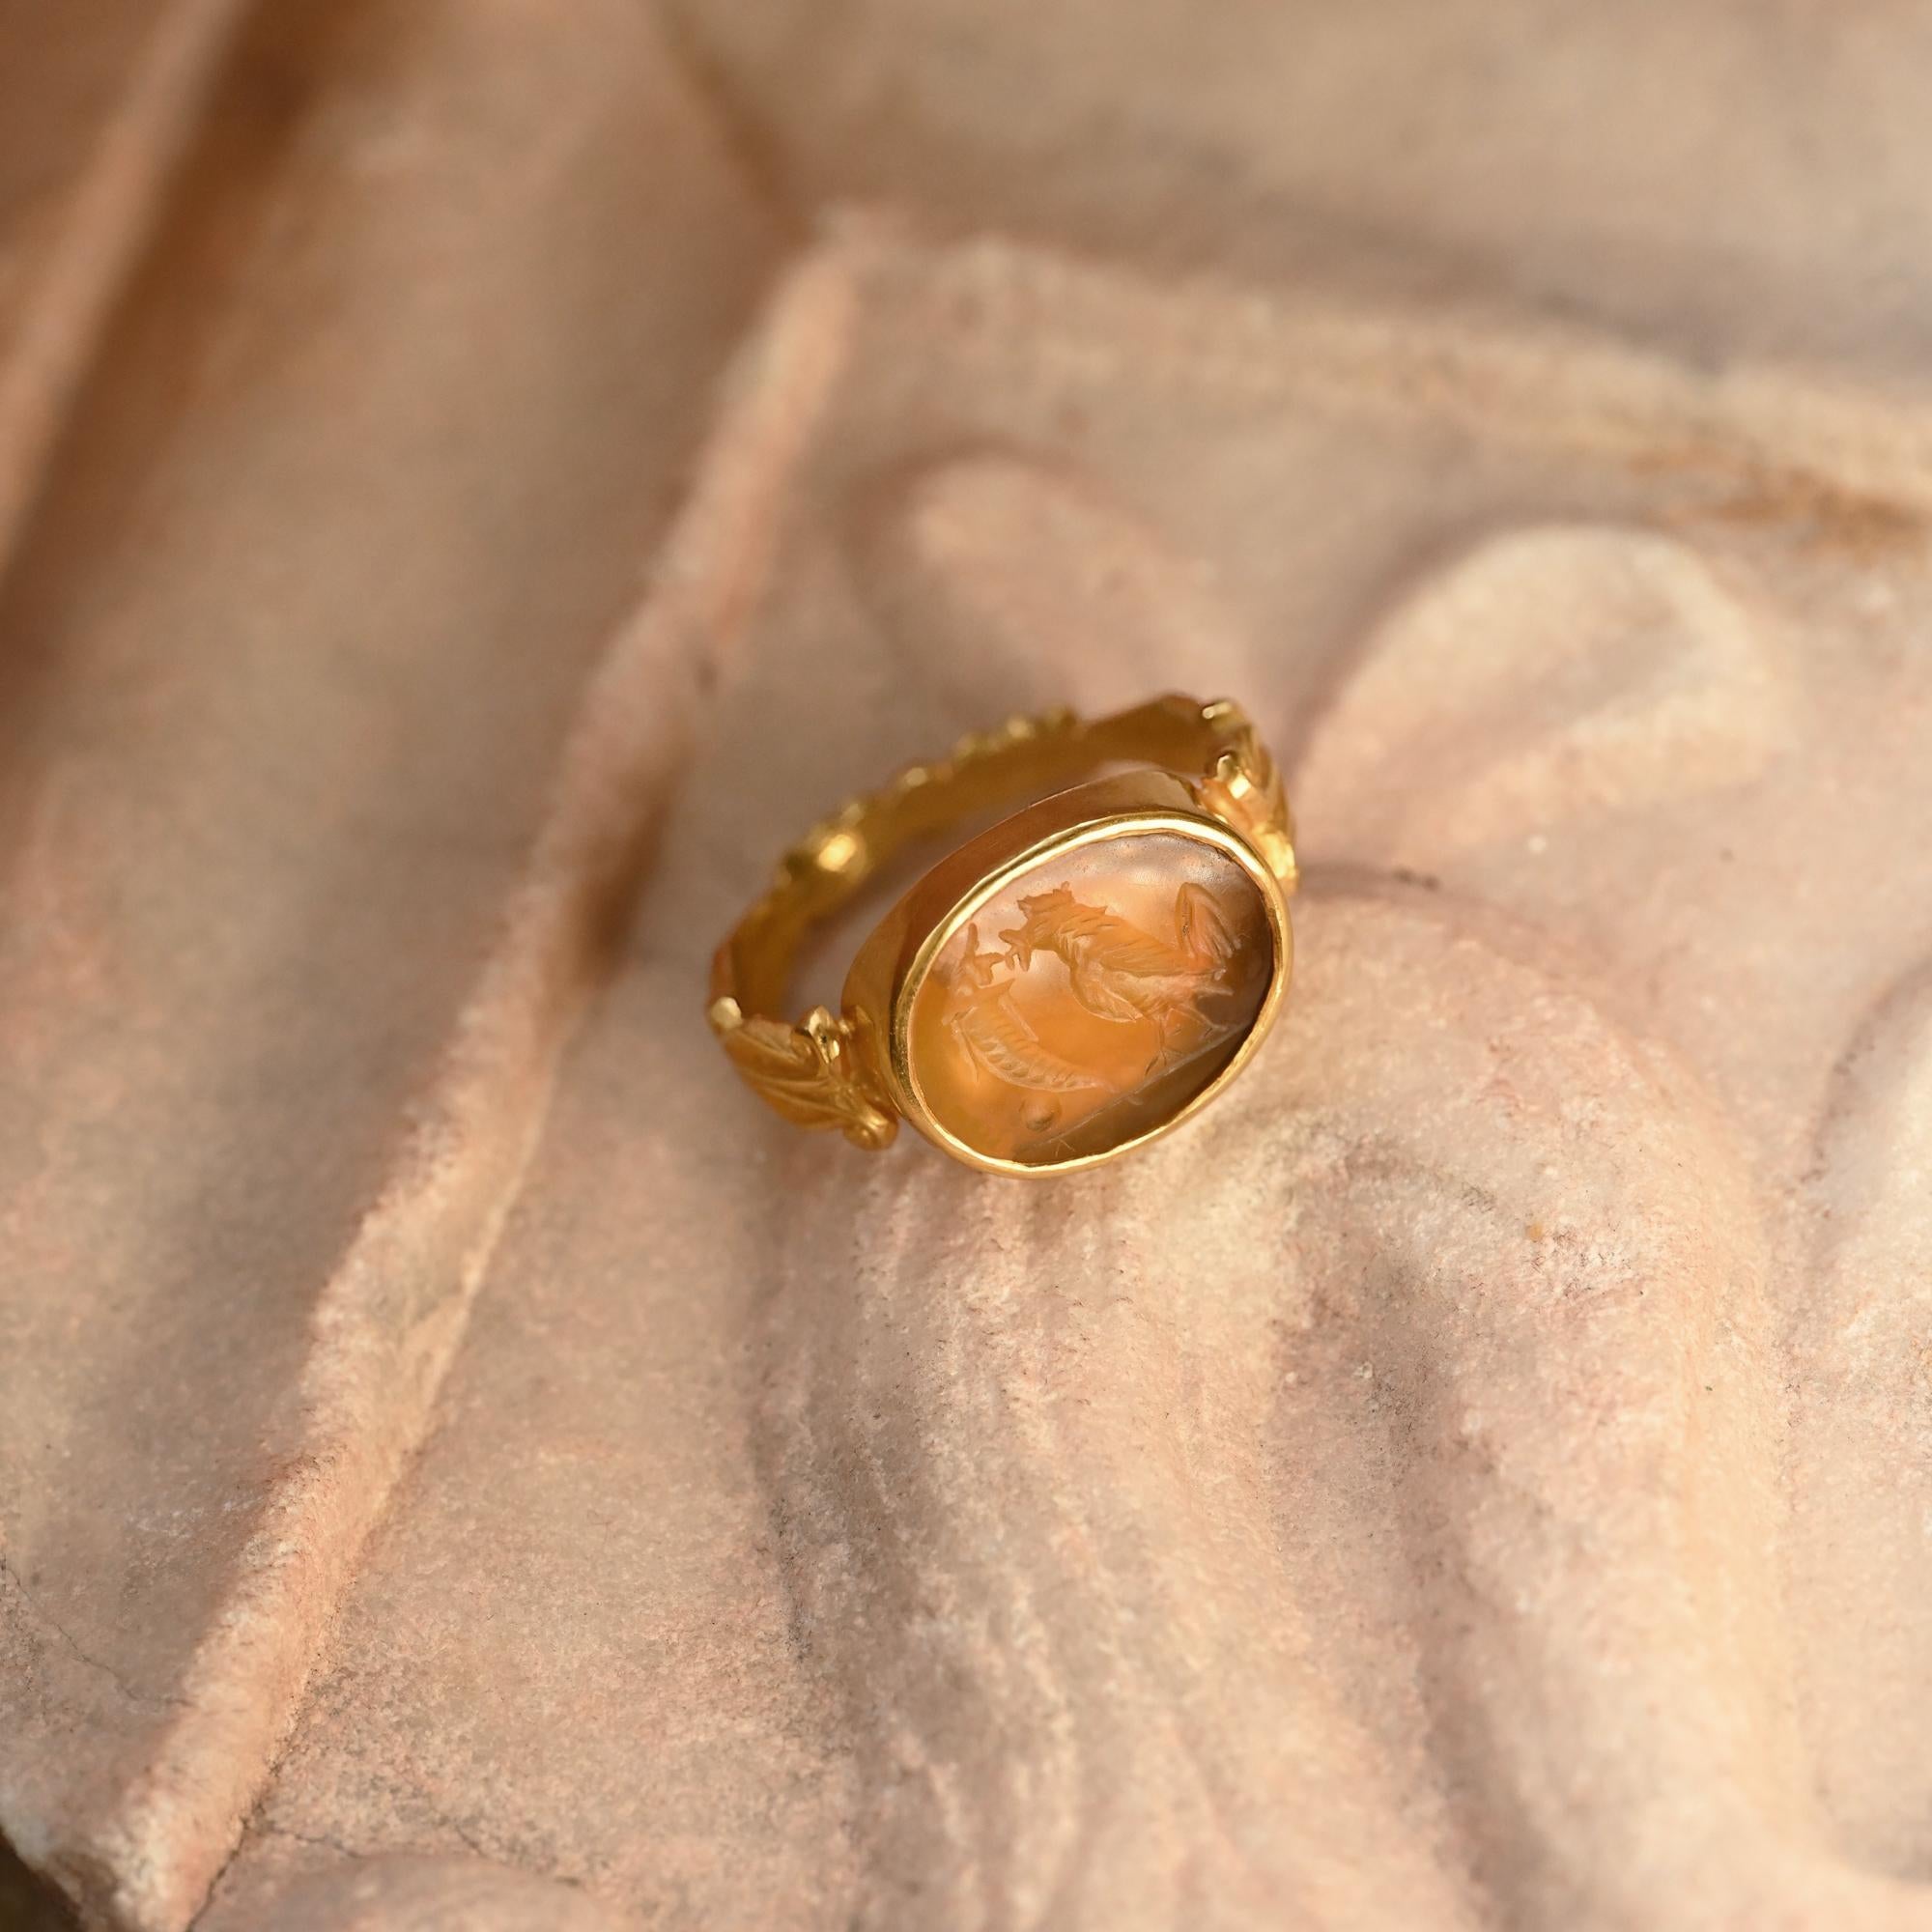 Classical Roman Ancient Roman Carnelian Intaglio 18Kt Gold Ring depicting Rooster and Cornucopia